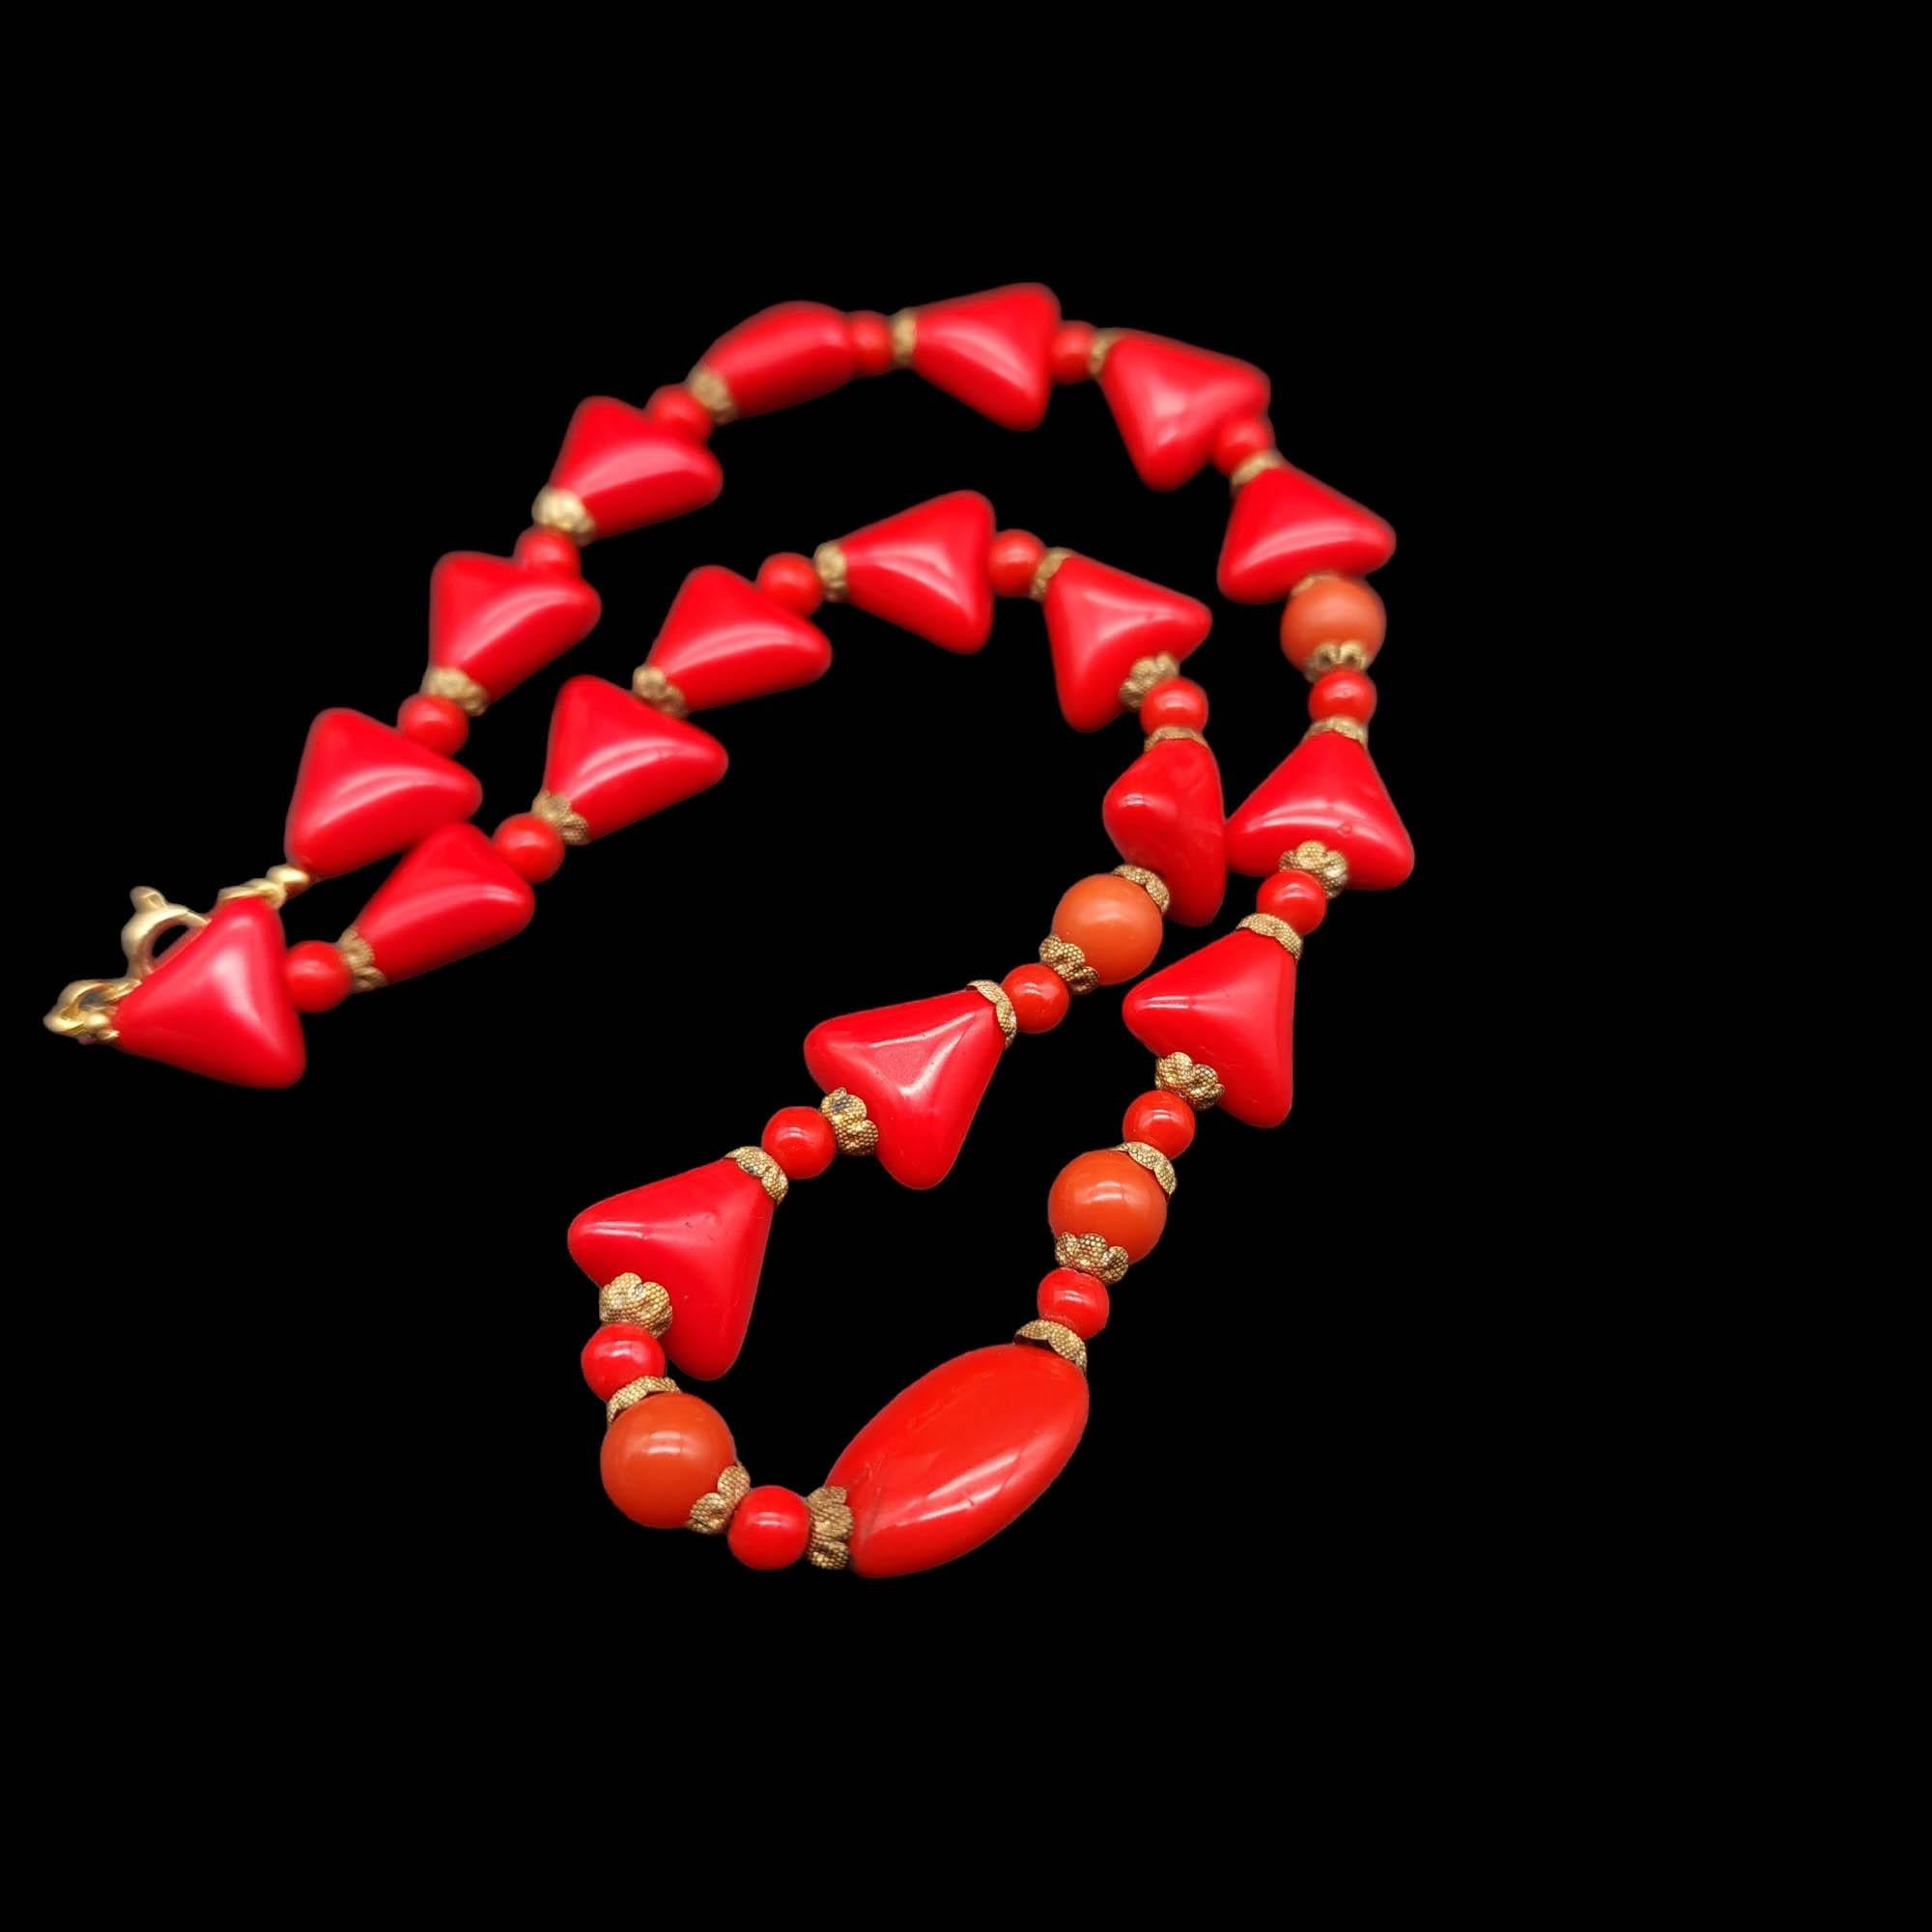 Retro Chic Red Lucite Bead Necklace, Triangle & Round Beads Gold-Filled Clasp, Vintage For Sale